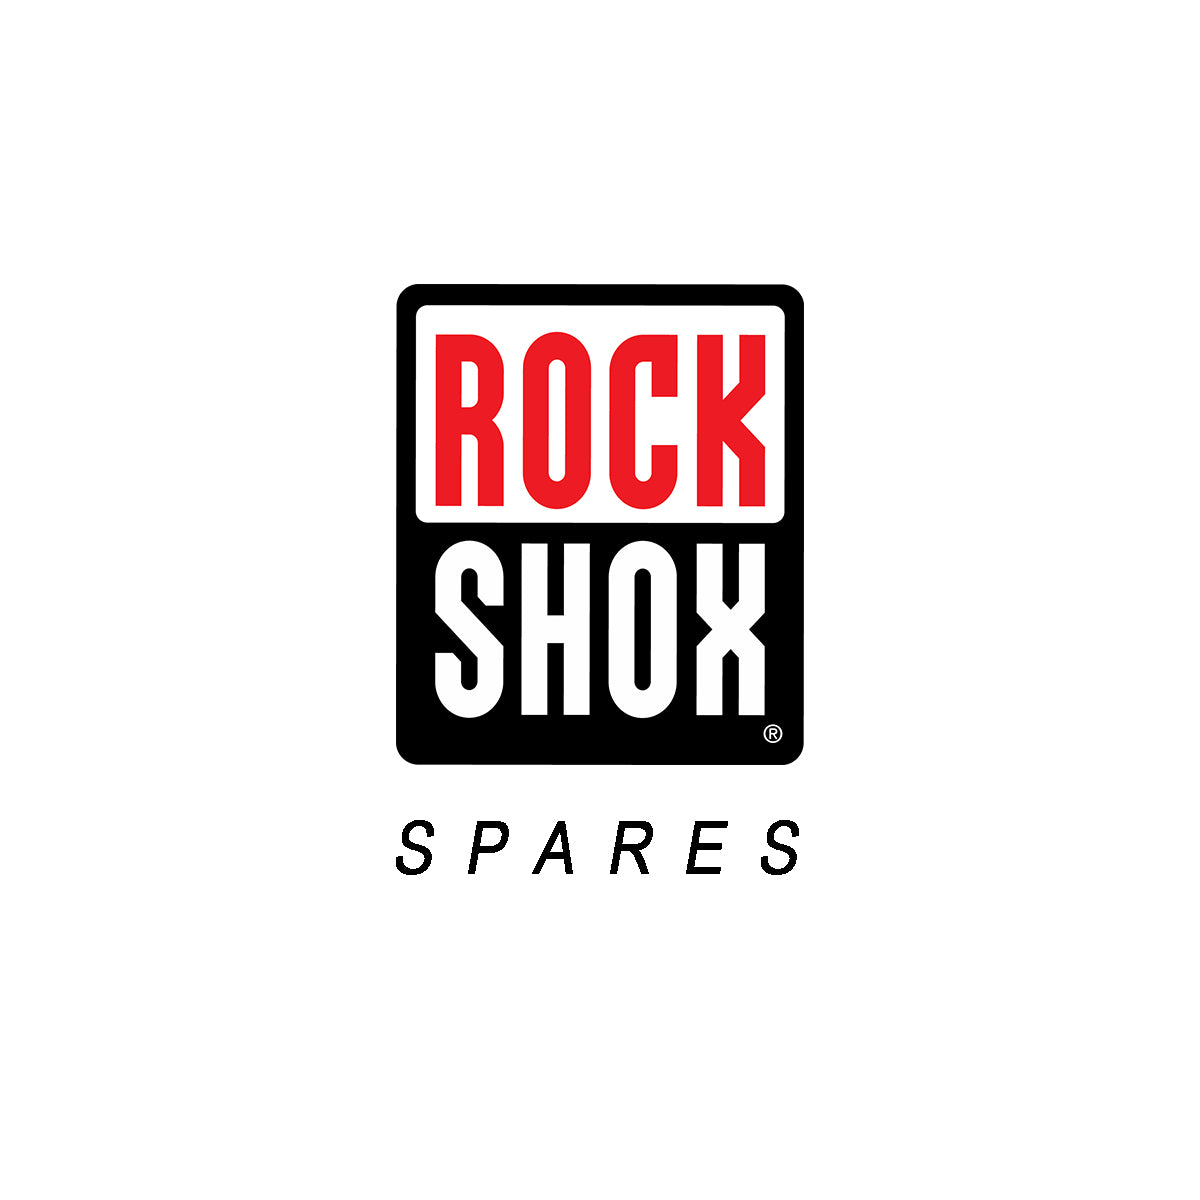 Rockshox Spare - Seatpost Service 400 Hour/2 Year Service Kit Includes New Upgraded Ifp; Requires Post Bleed Tool, Oil Height Tool And Ifp Height Tool Reverb B1(2017)